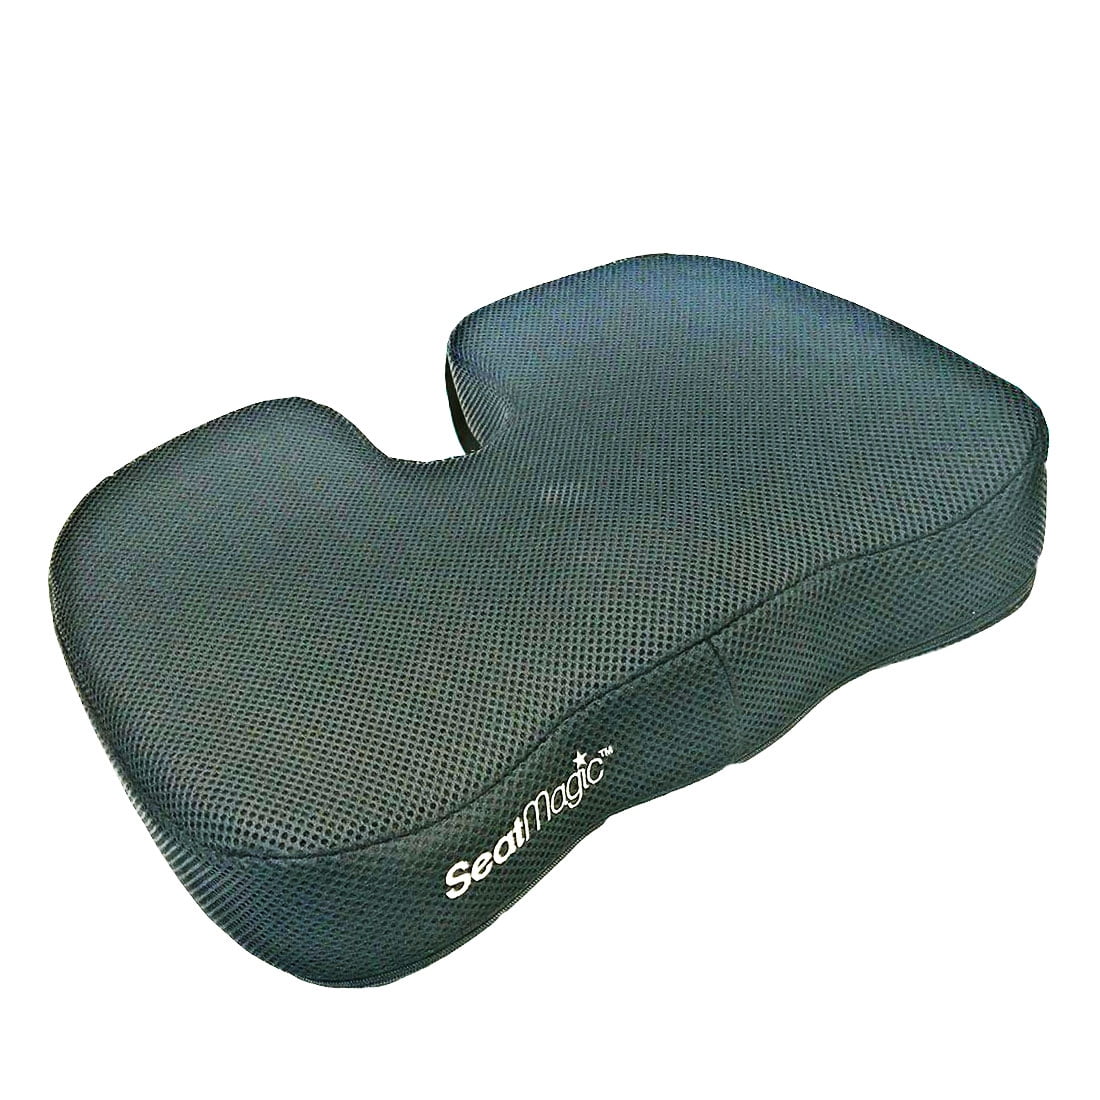 BUTORY Inflatable Seat Cushion,Butt Lift Pillows for Home Car